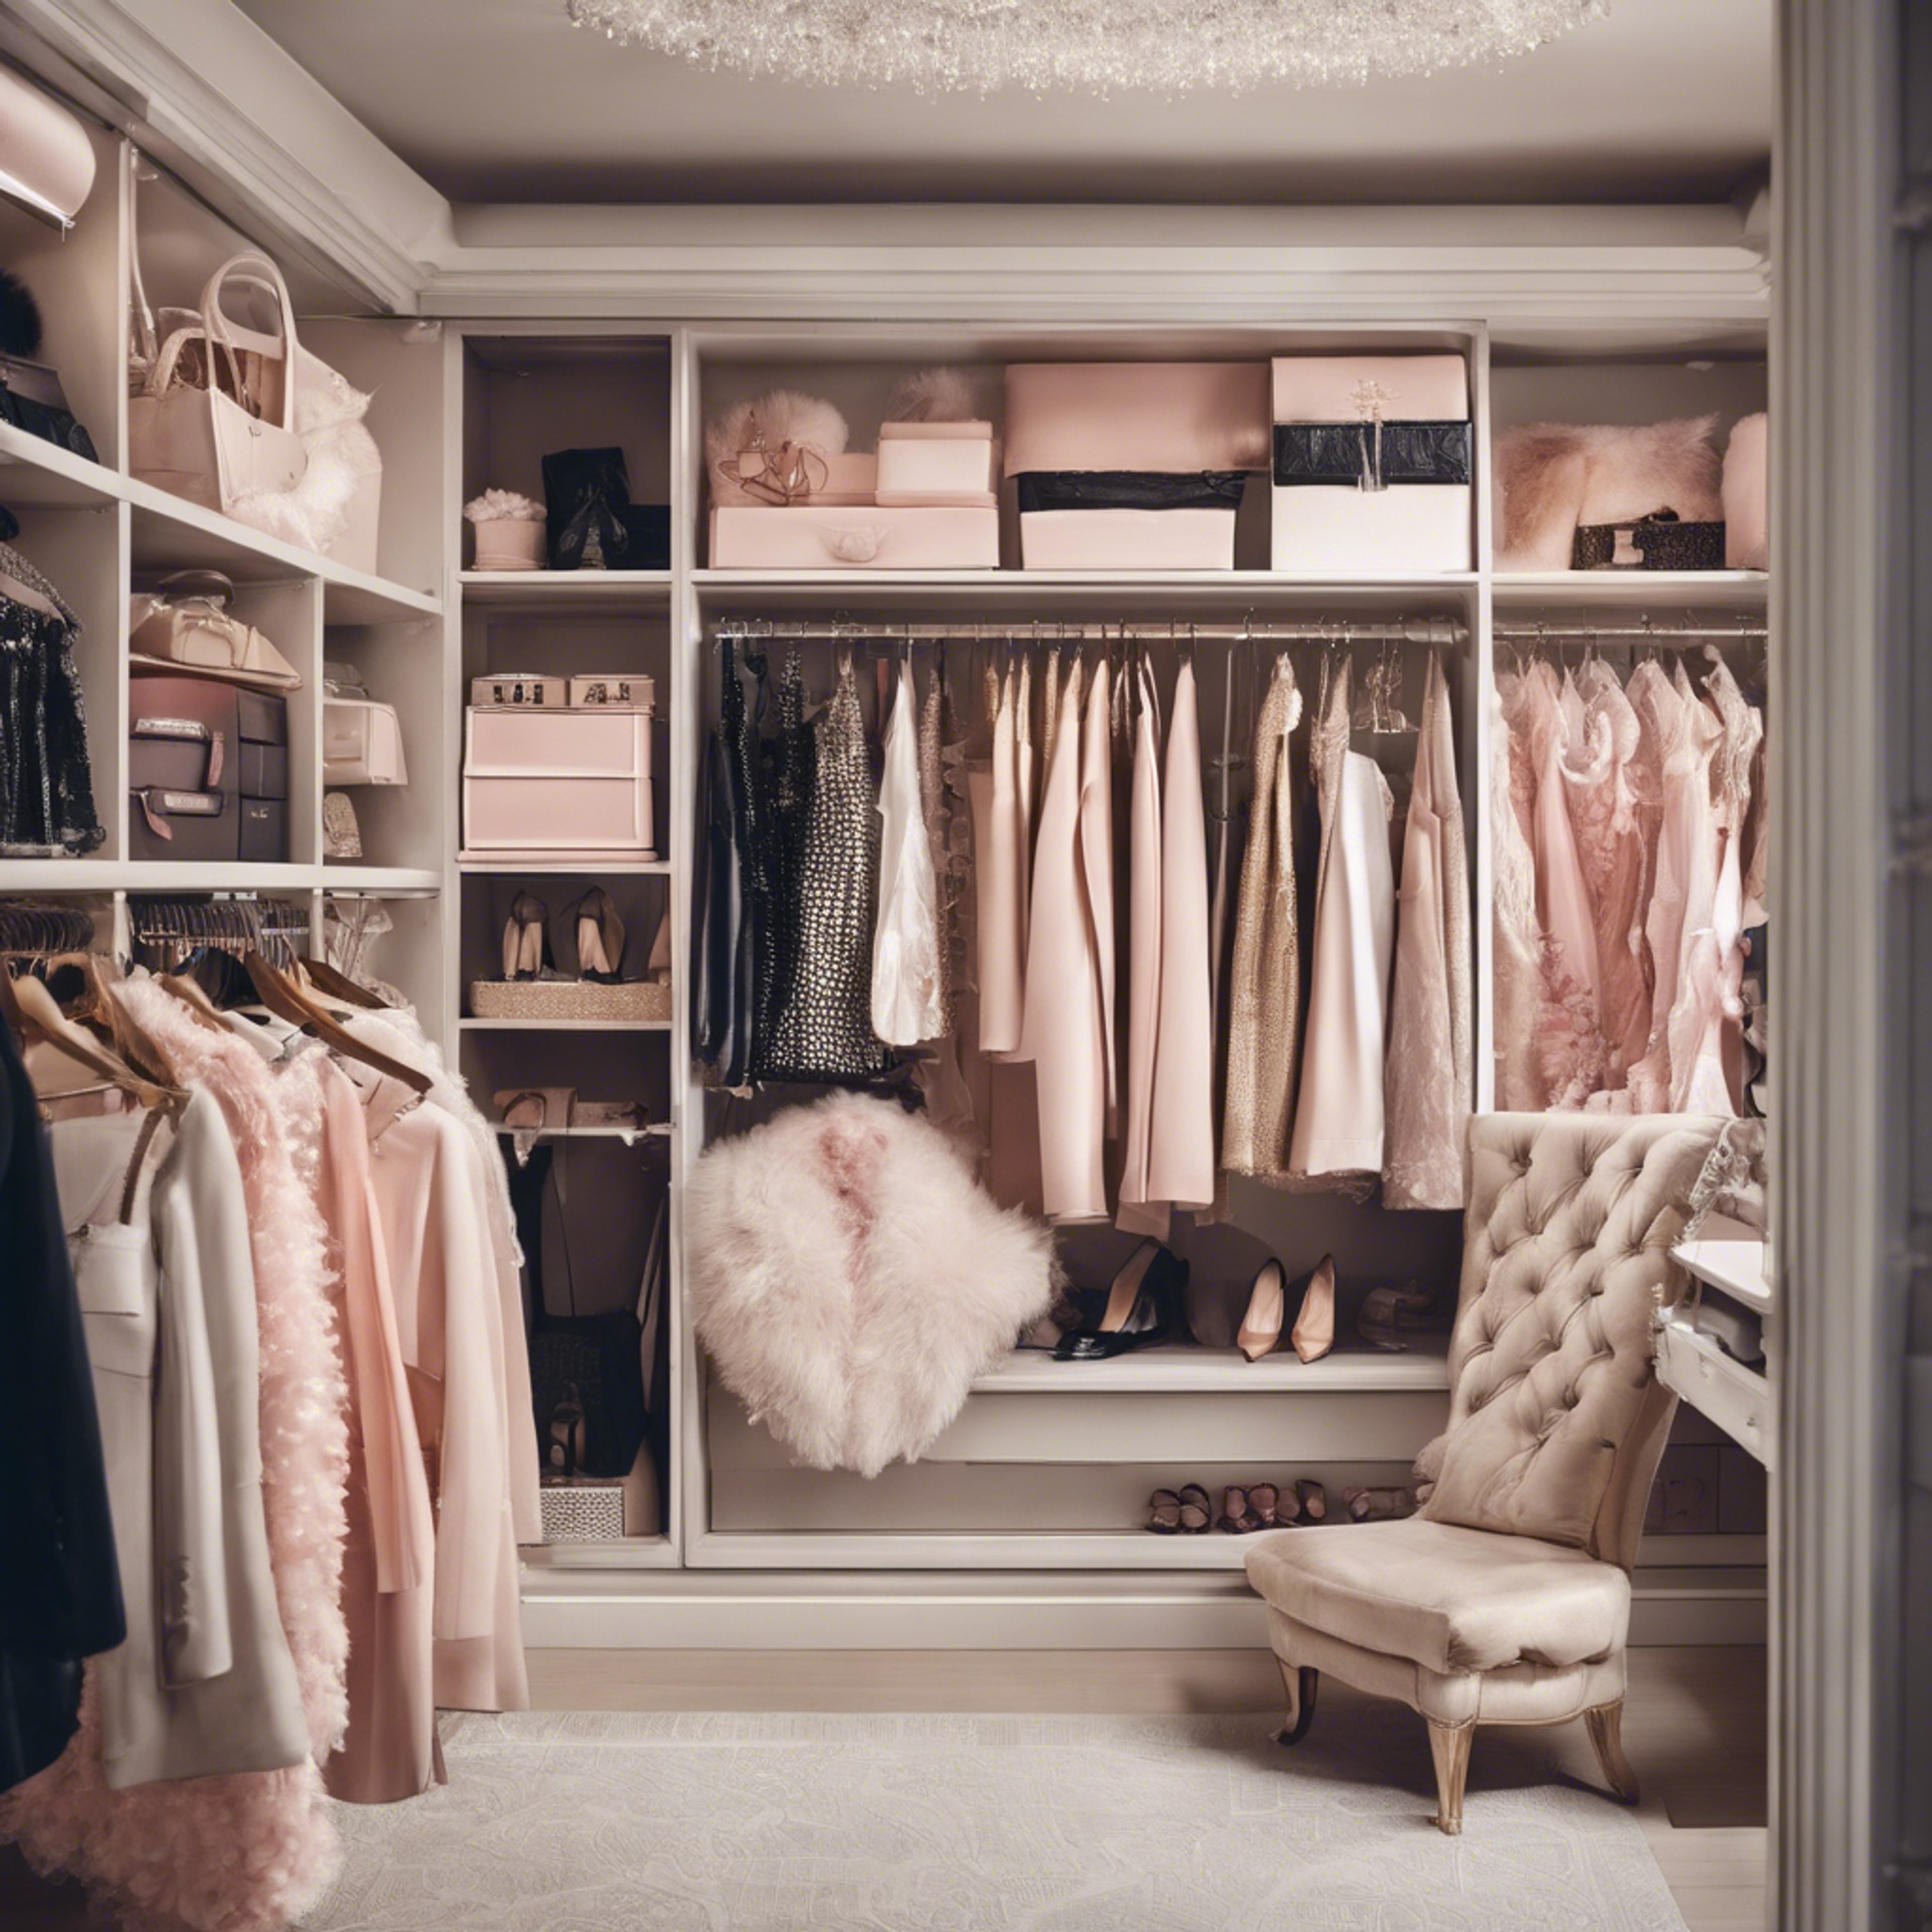 A chic and girly walk-in closet filled with French couture fashion and accessories.壁紙[8866e00bbc364656a394]